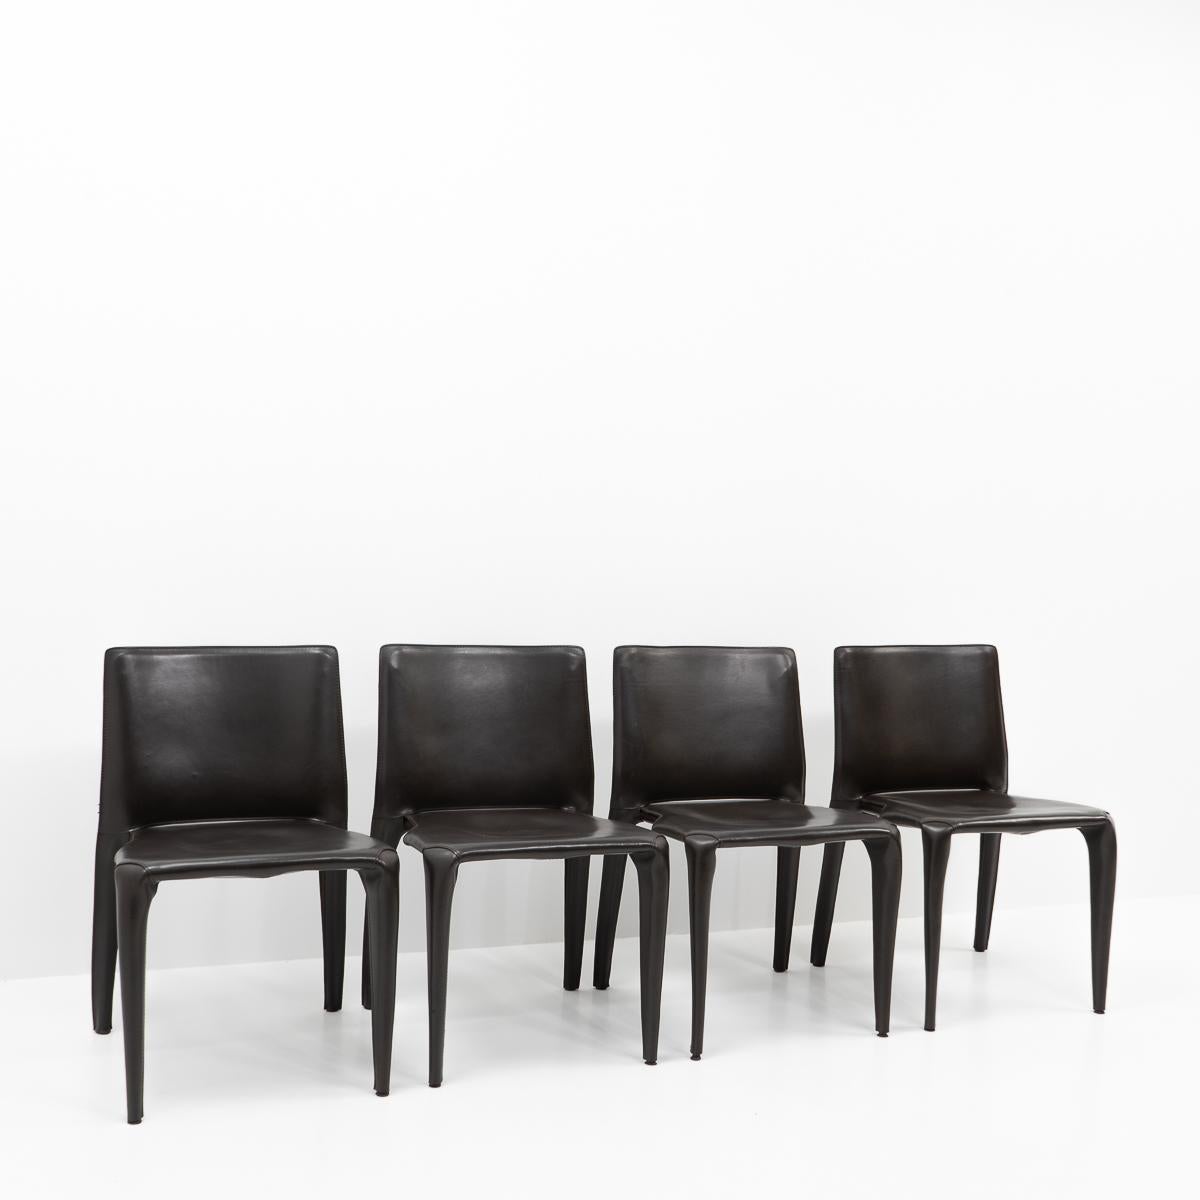 Italian Mario Bellini “Bull” Side Chairs for Cassina, Set of Four, 1990s For Sale